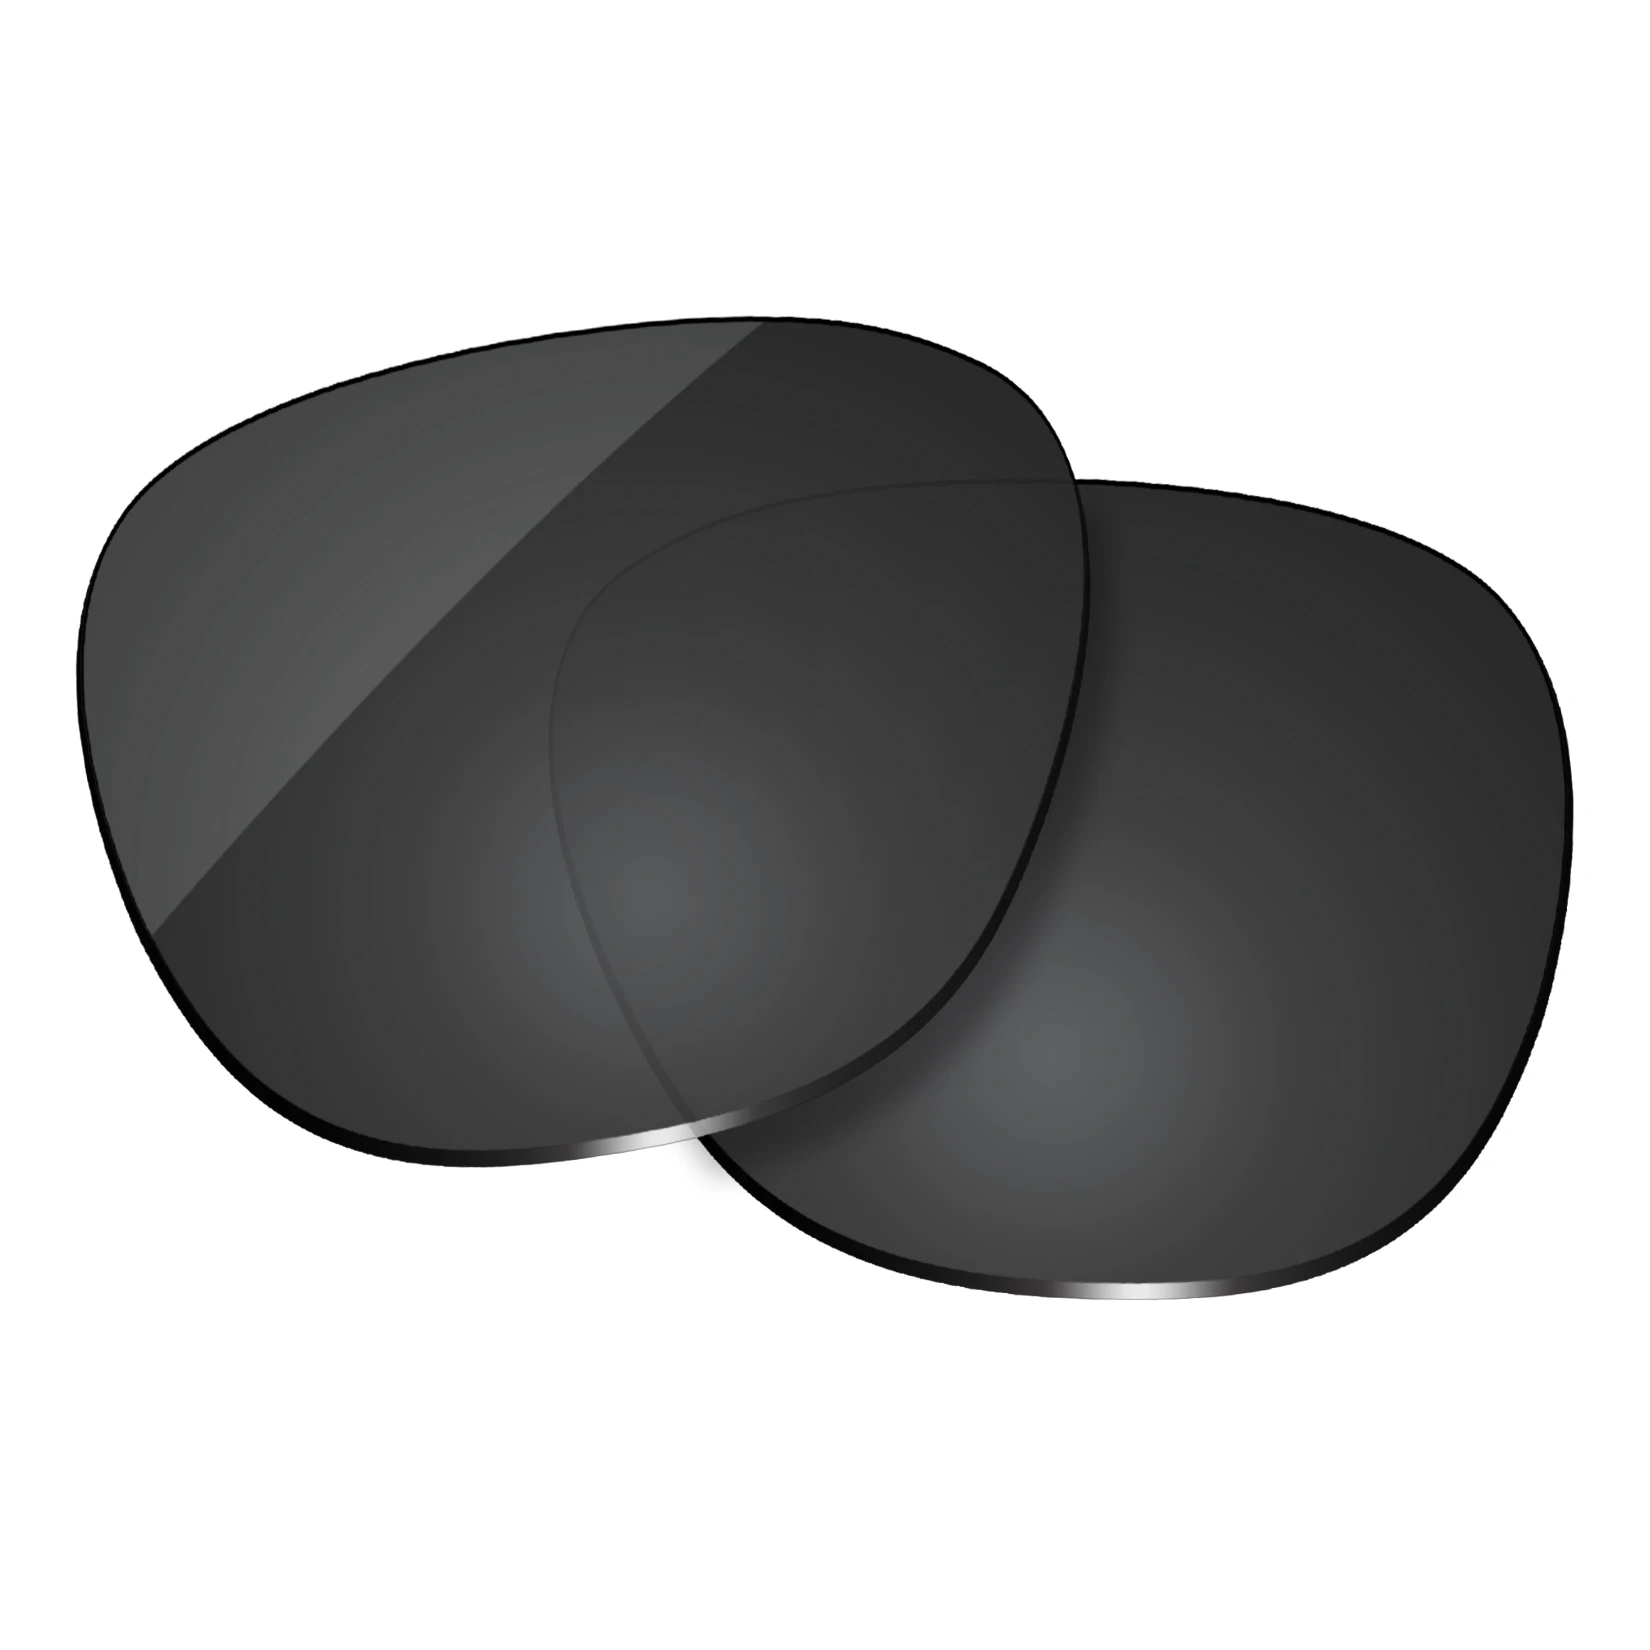 OOWLIT Polarized Replacement Lenses for-Smith Haywire Sunglasses (Lens Only)